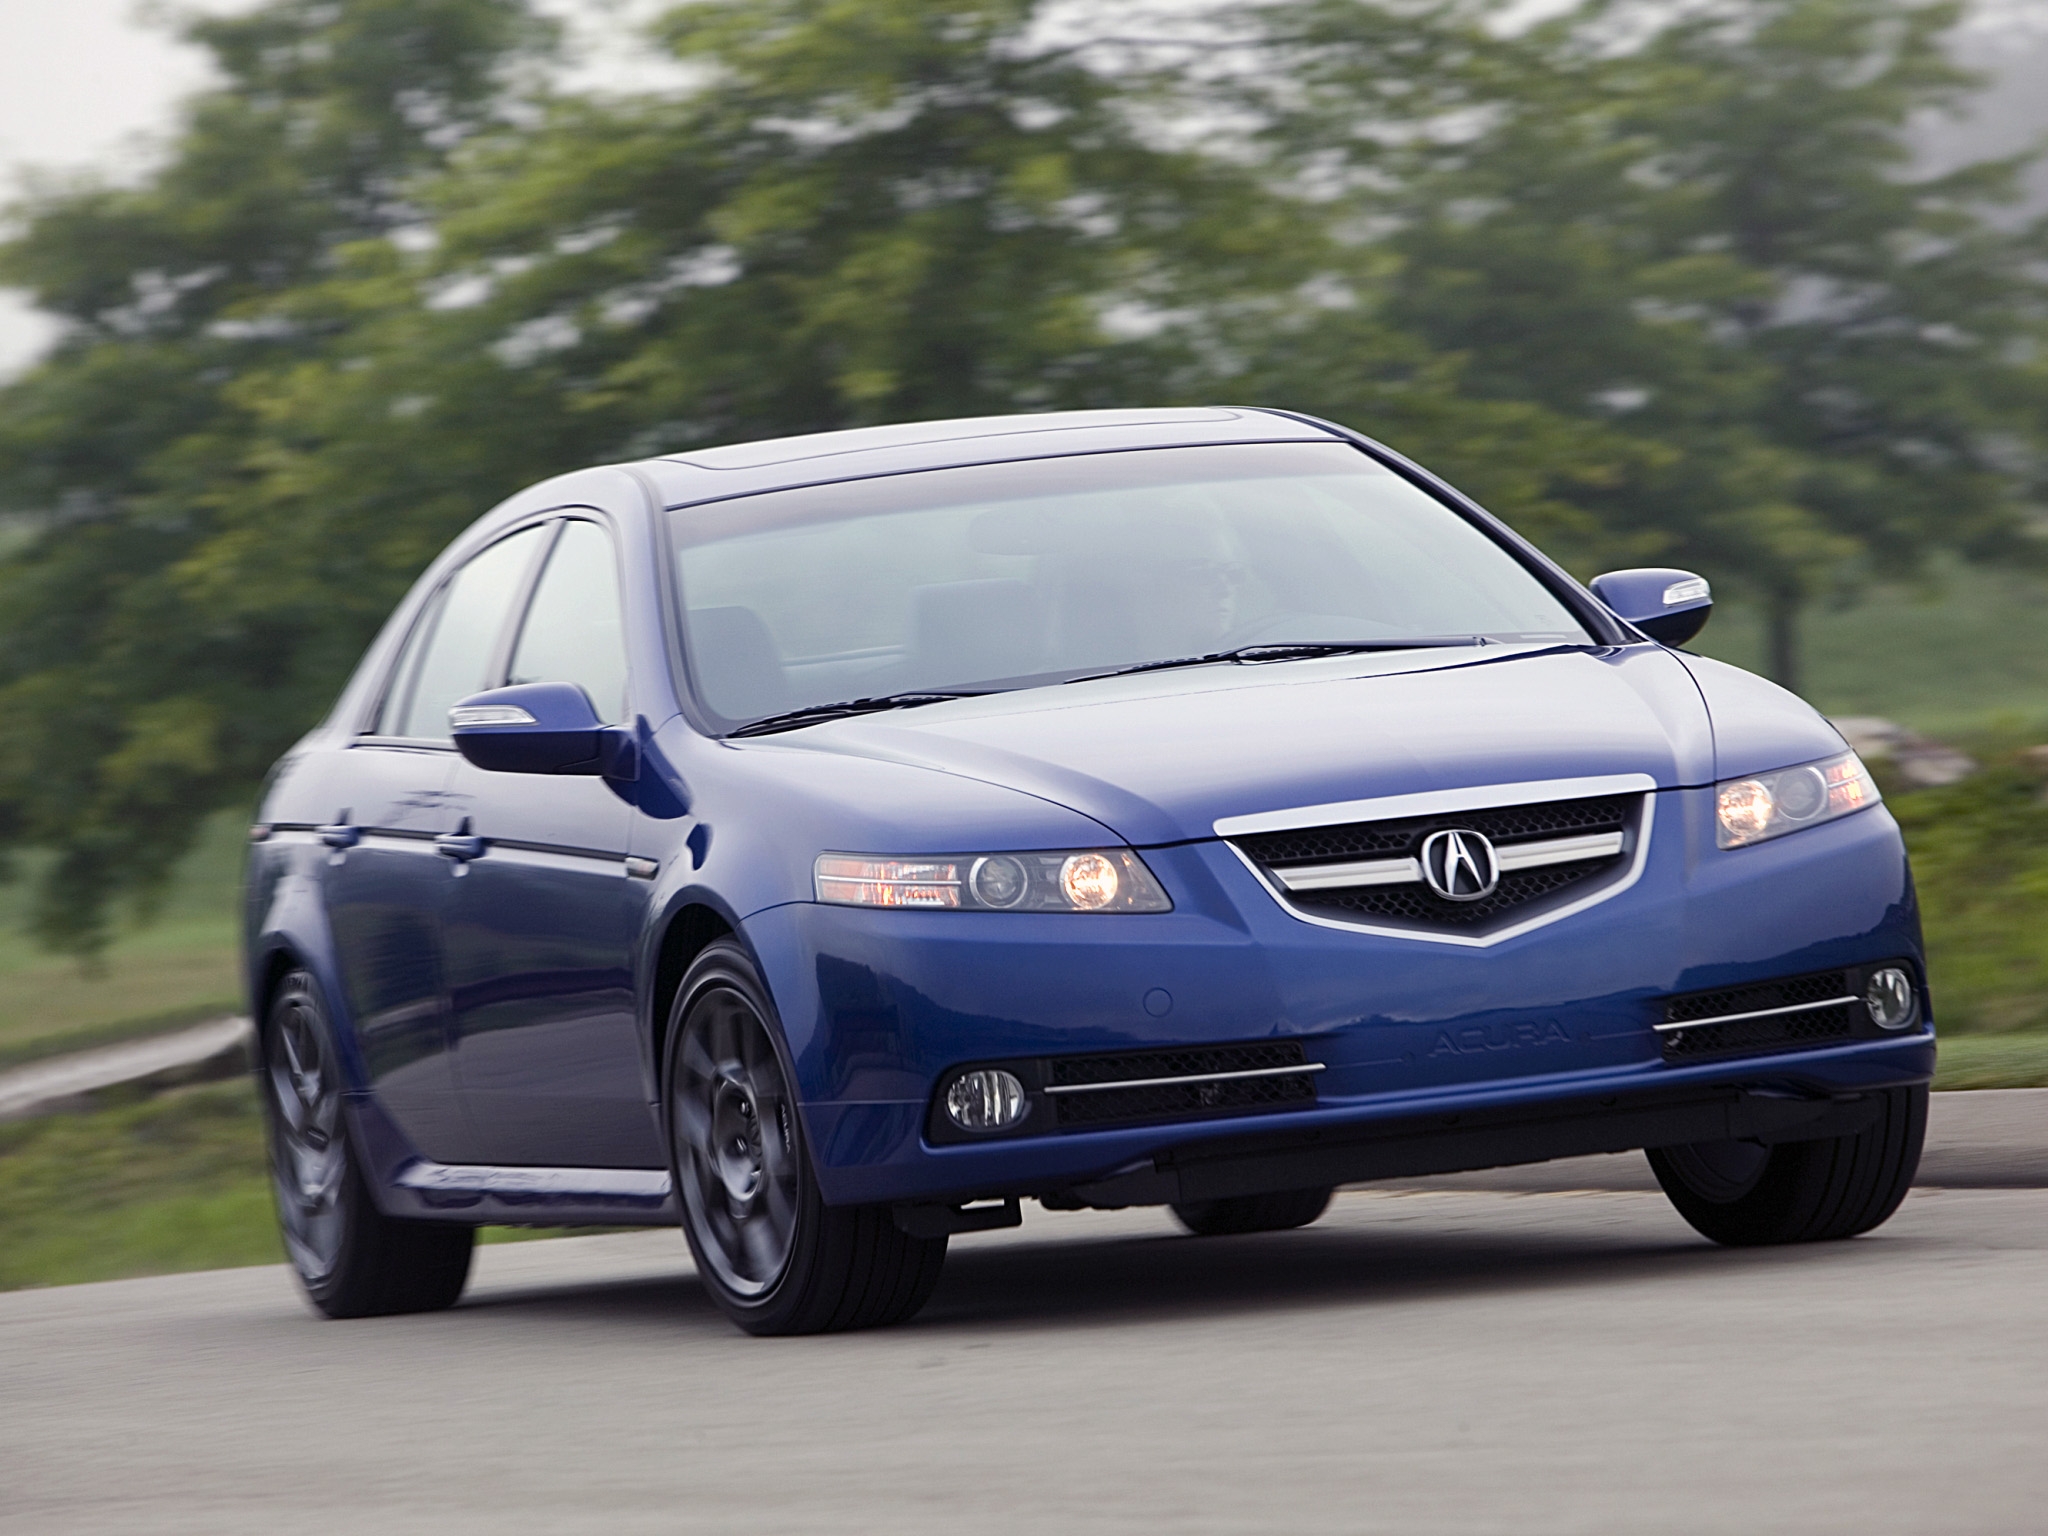 1920x1080 Background auto, trees, grass, acura, cars, blue, asphalt, front view, speed, style, akura, tl, 2007